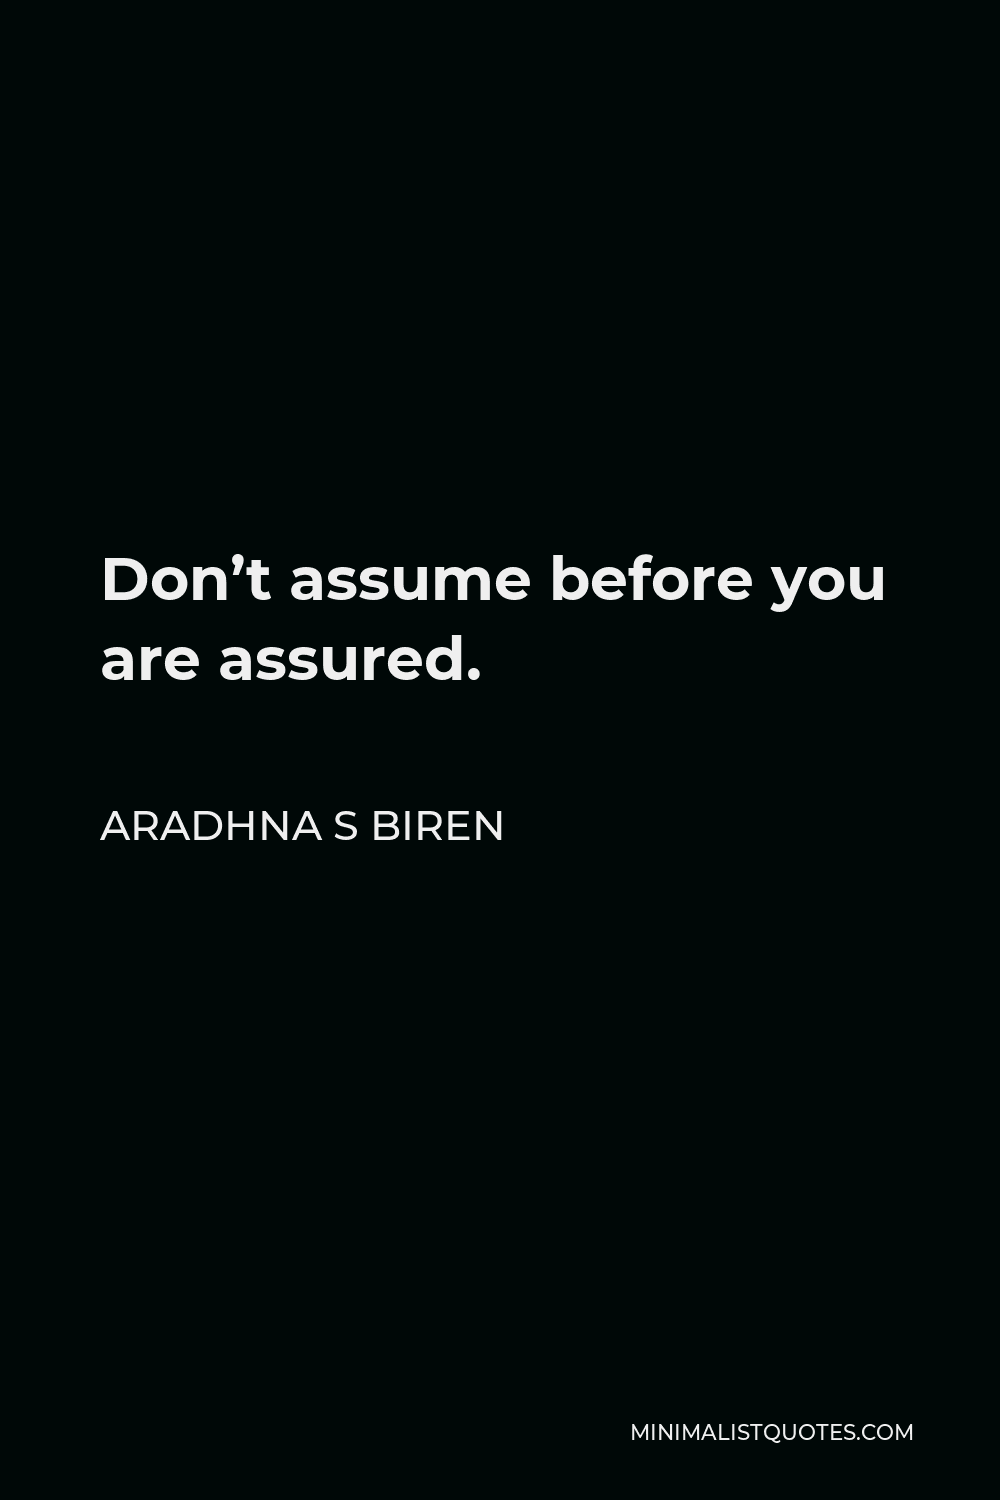 Aradhna S Biren Quote - Don’t assume before you are assured.